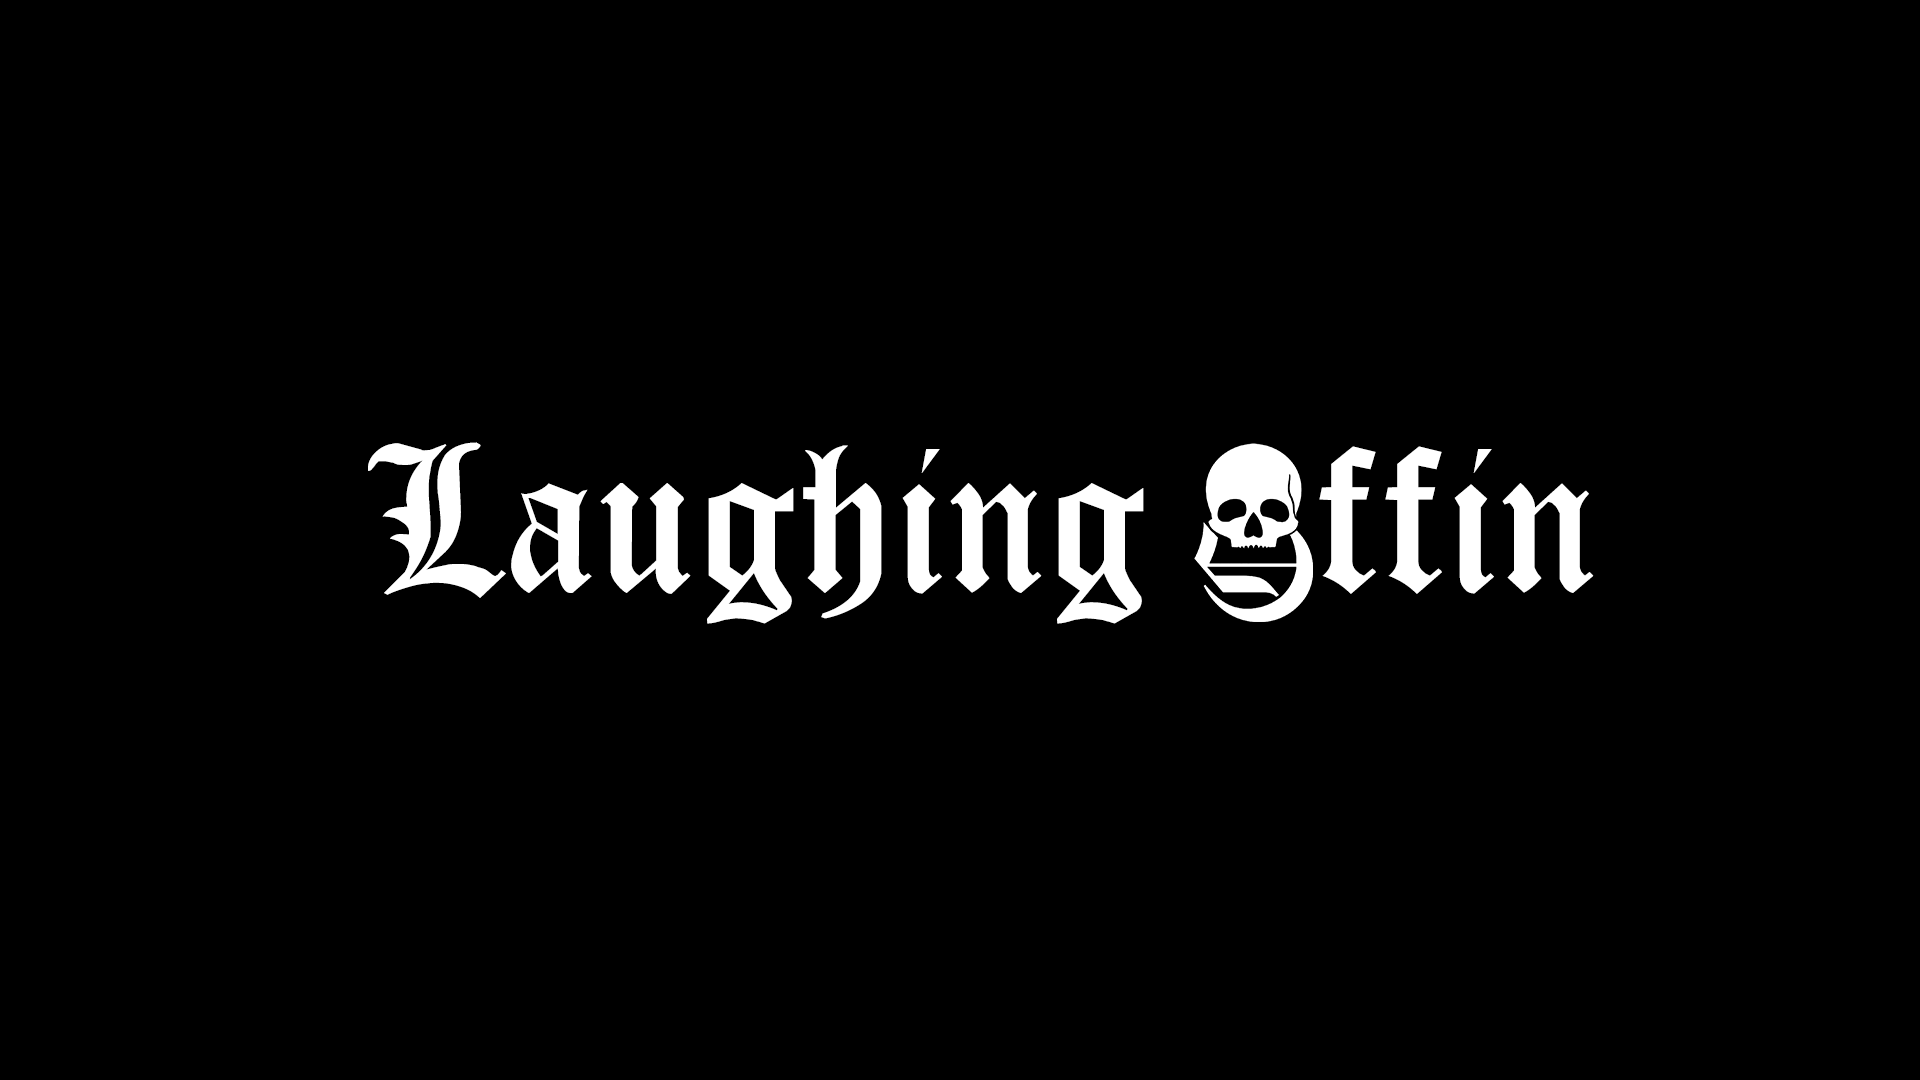 Laughing Coffin LC Lettering White. Lettering, Laugh, Sao